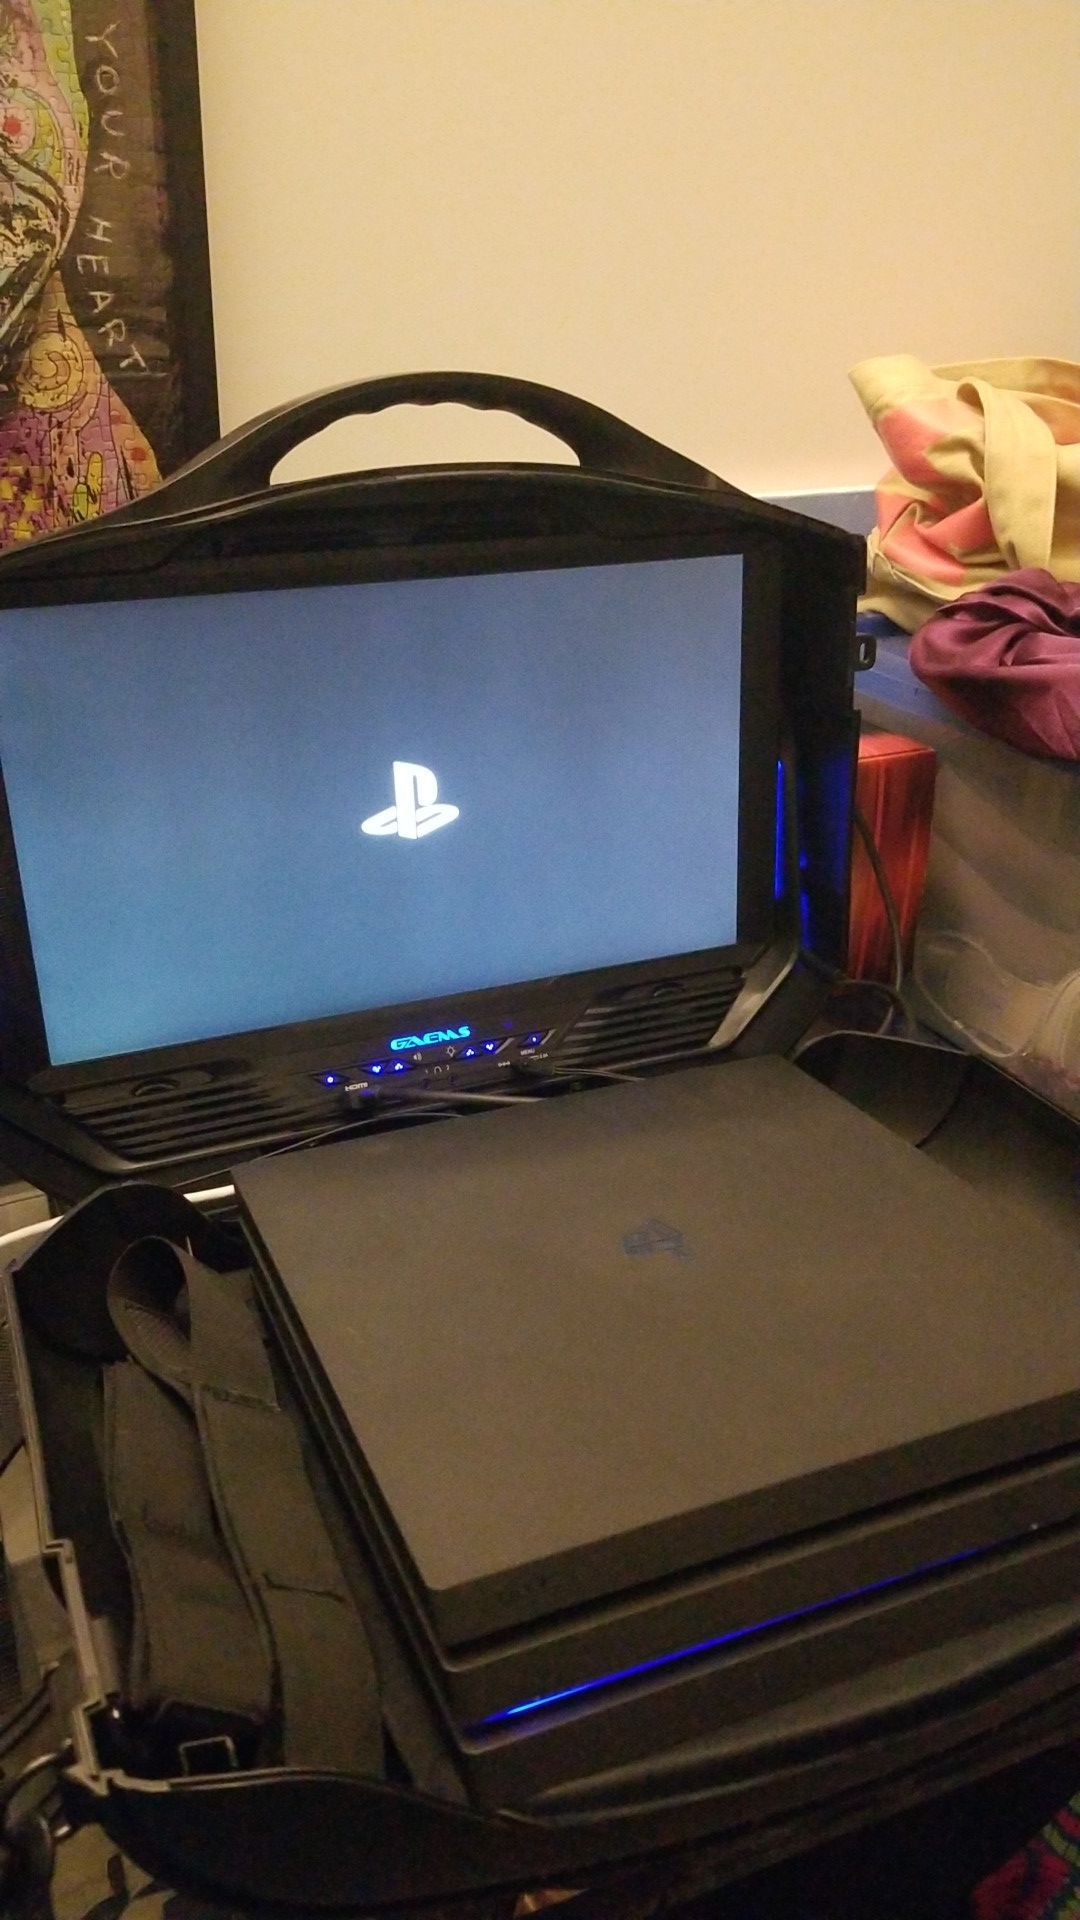 Gaems like new portable gaming system. PS4 not included